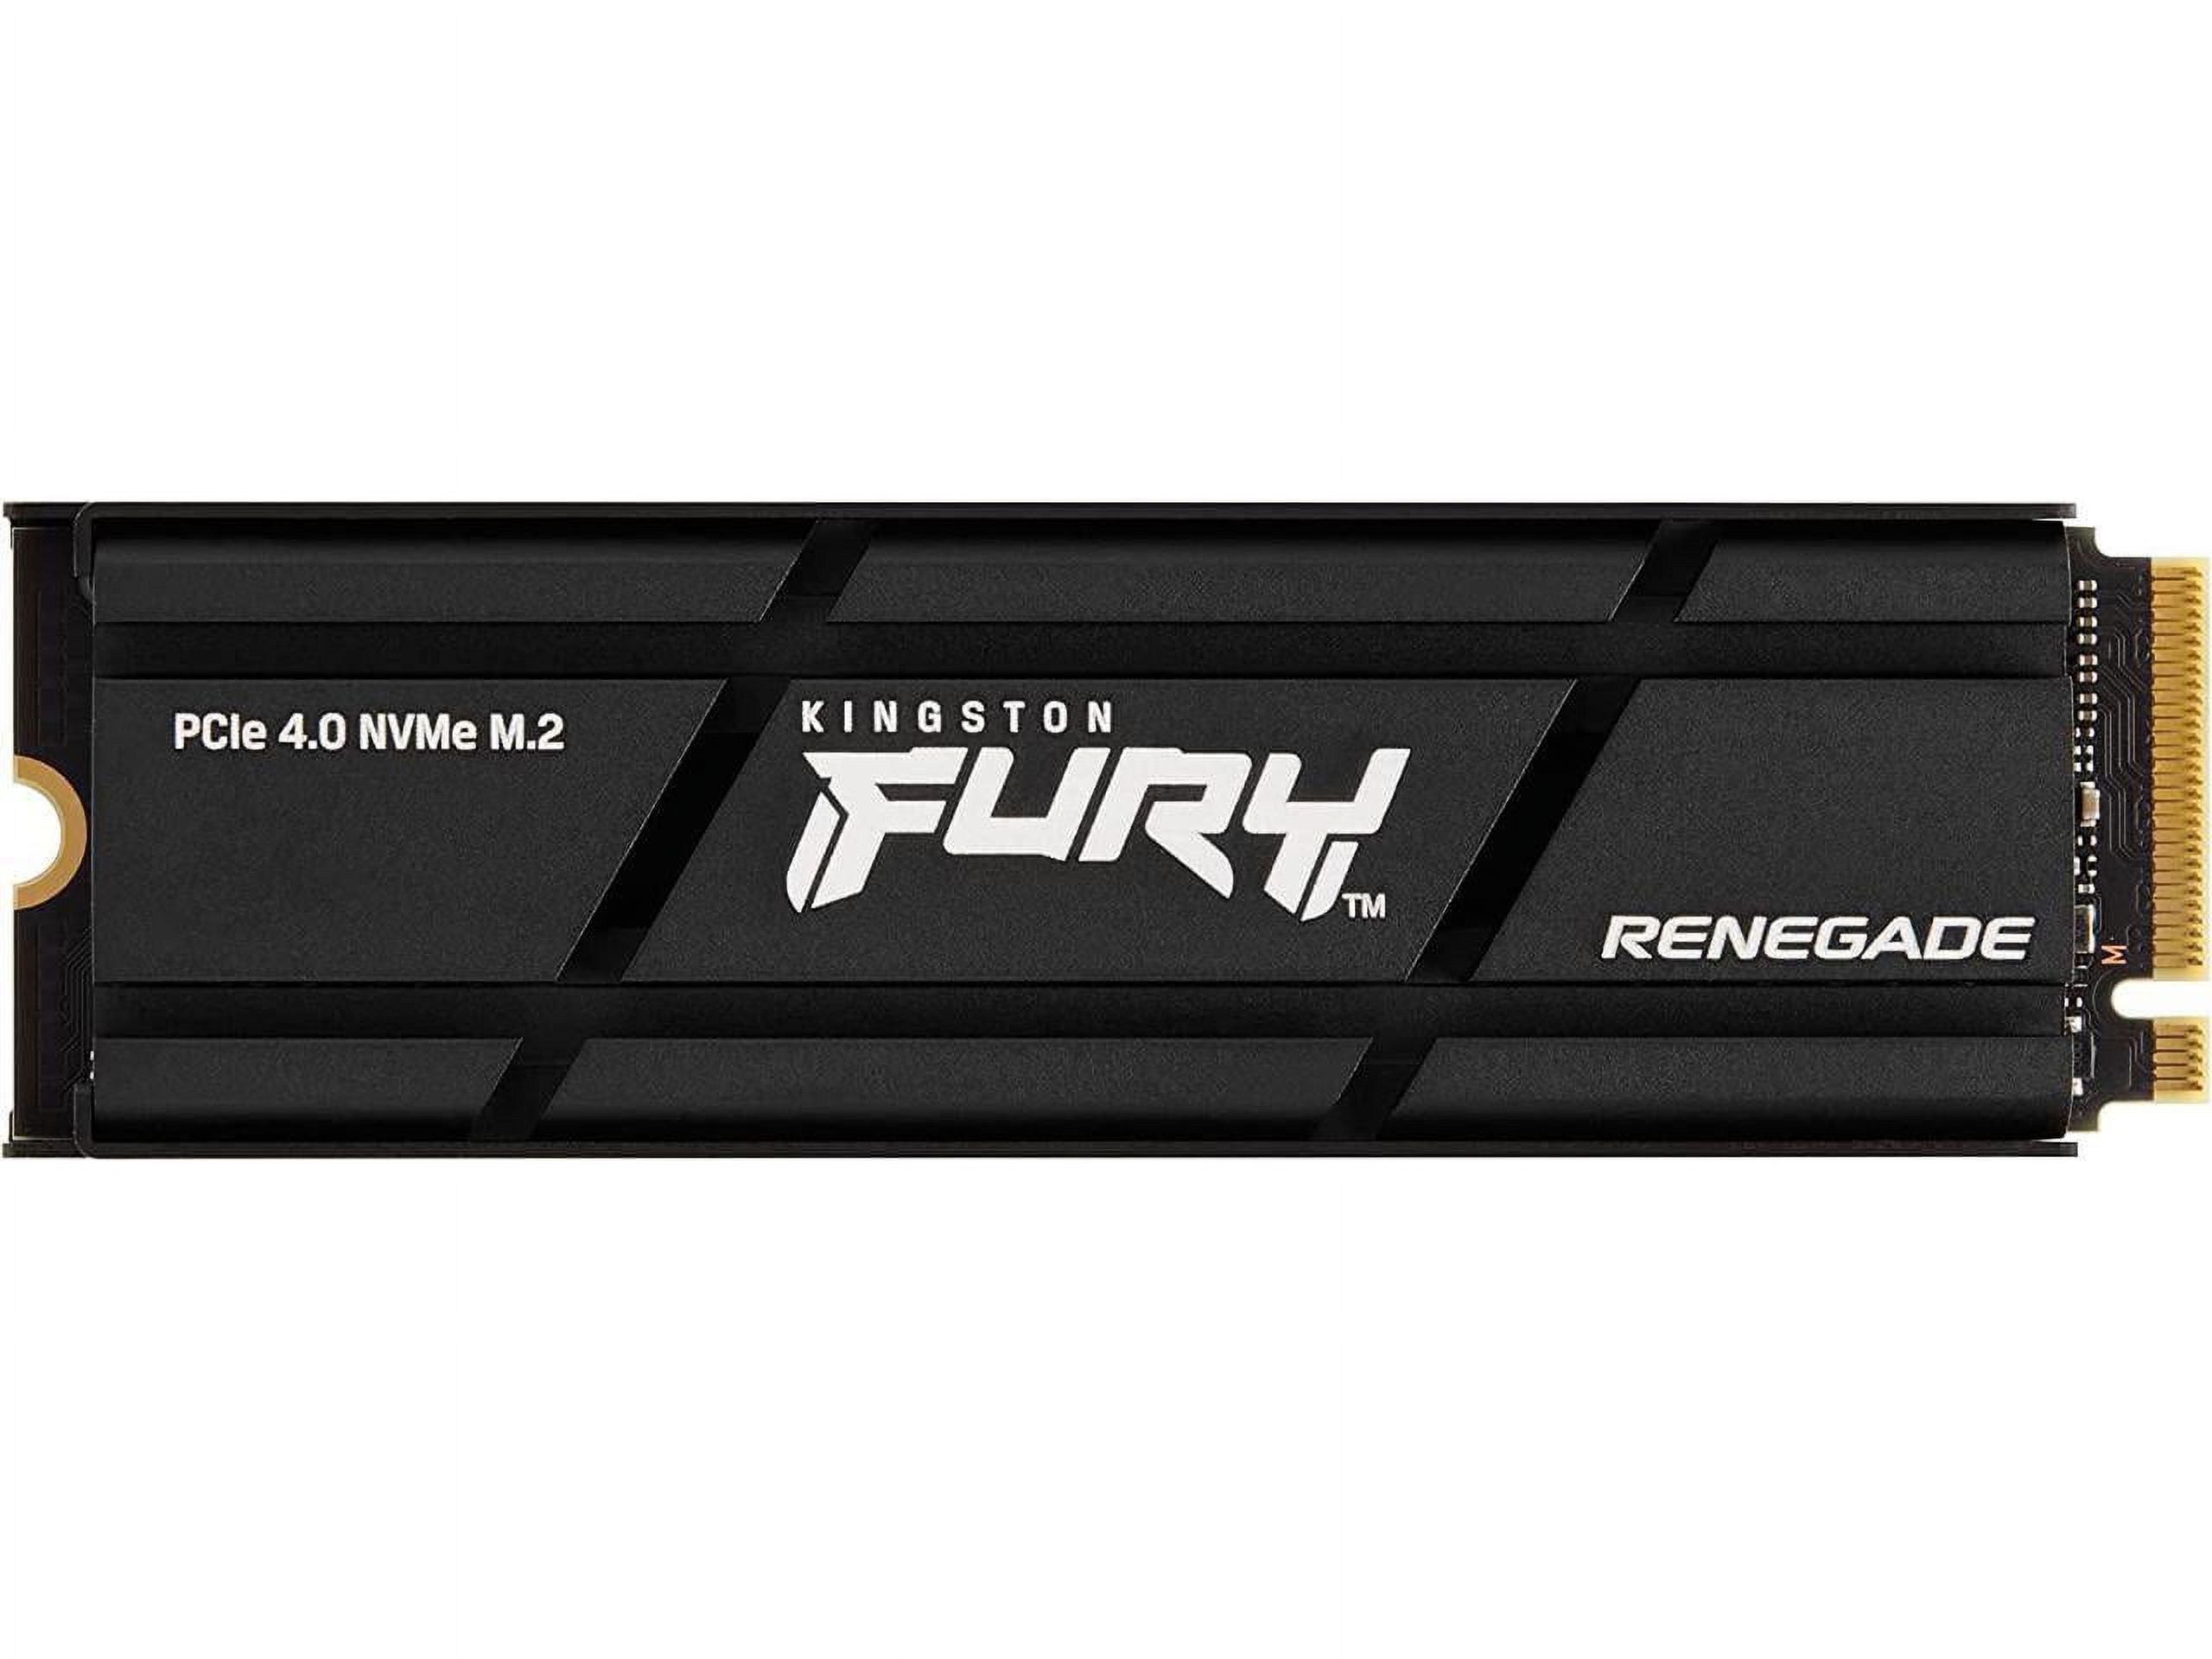 Kingston SFYRDK/2000G Fury Renegade 2TB PCIe Gen 4 NVMe M.2 Internal Gaming SSD with Heat Sink|PS5 Ready|Up to 7300MB/s - image 1 of 6